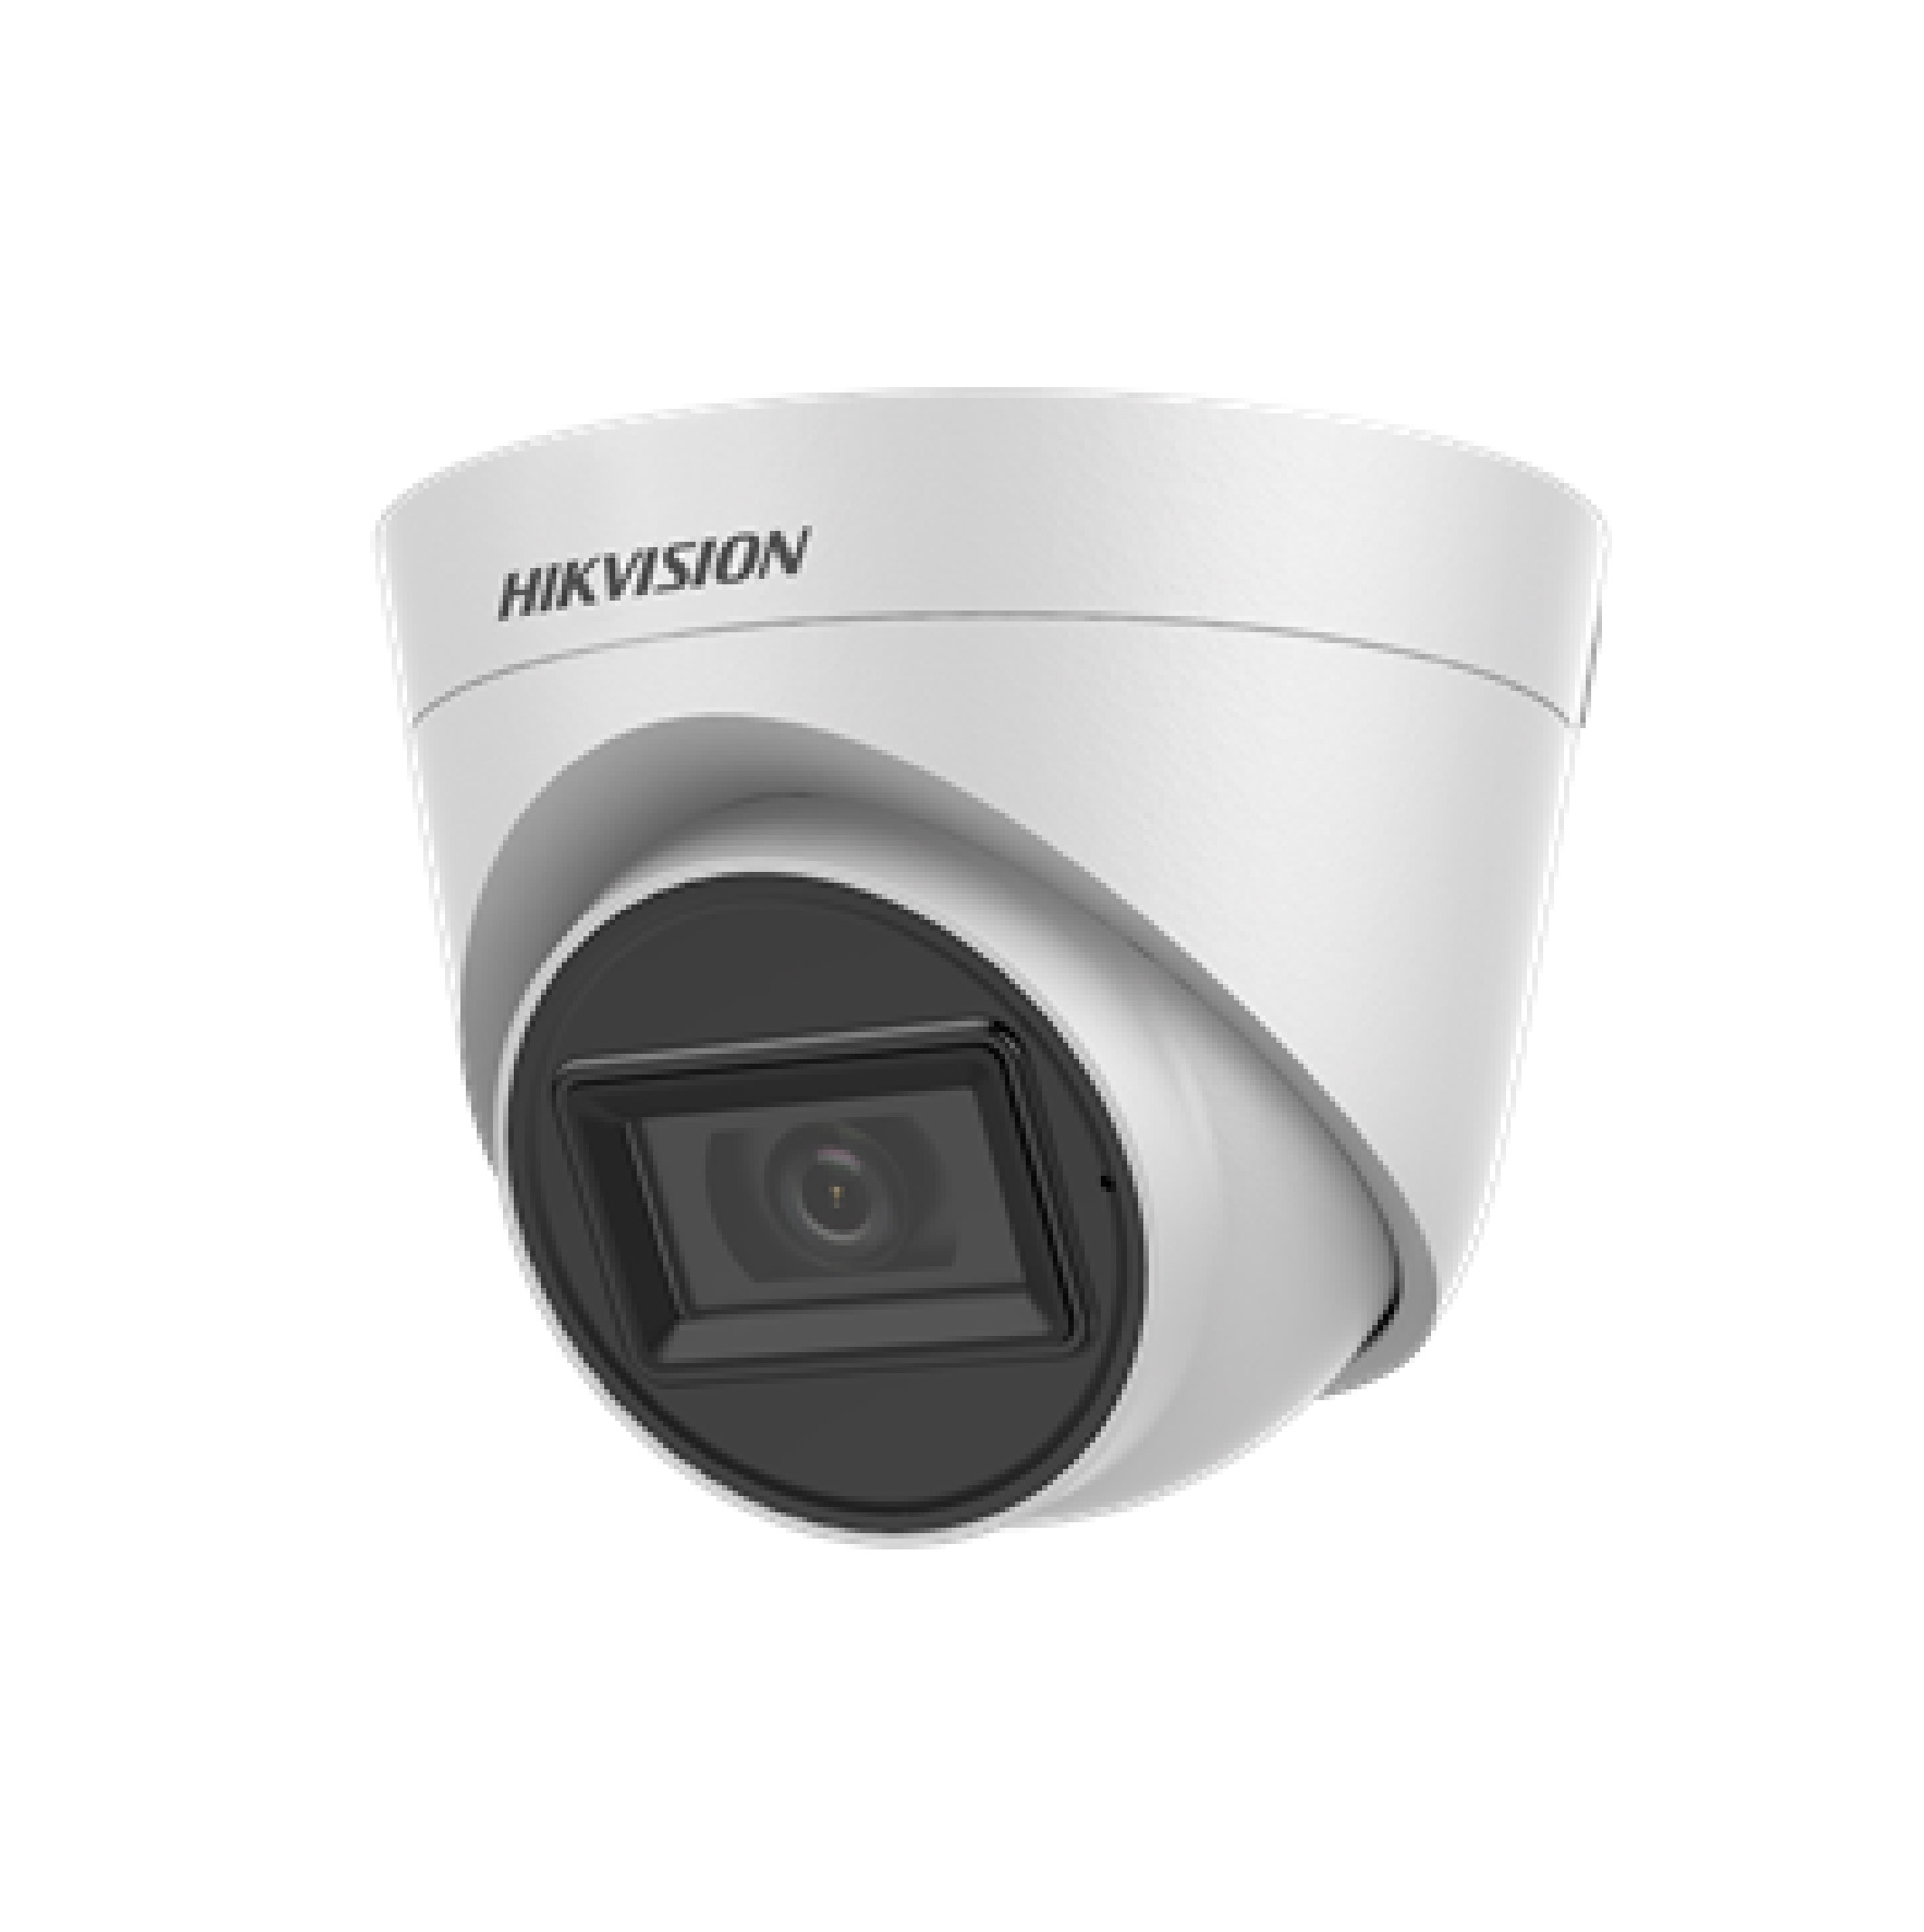 HIKVISION ​DS-2CE78H0T-IT3FS Turbo HD Camera 